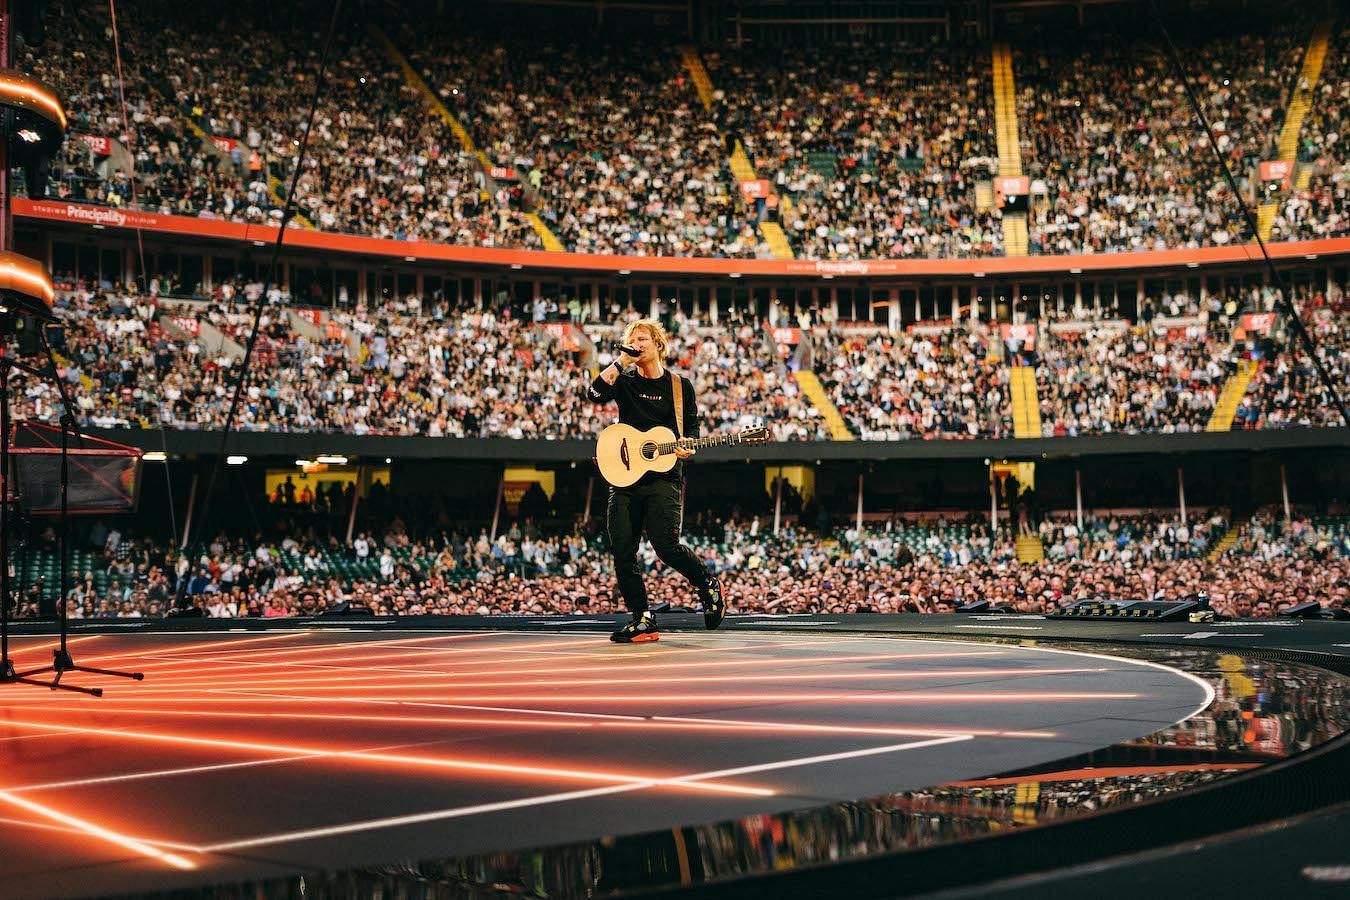 Ed Sheeran has also performed in The Principality Stadium